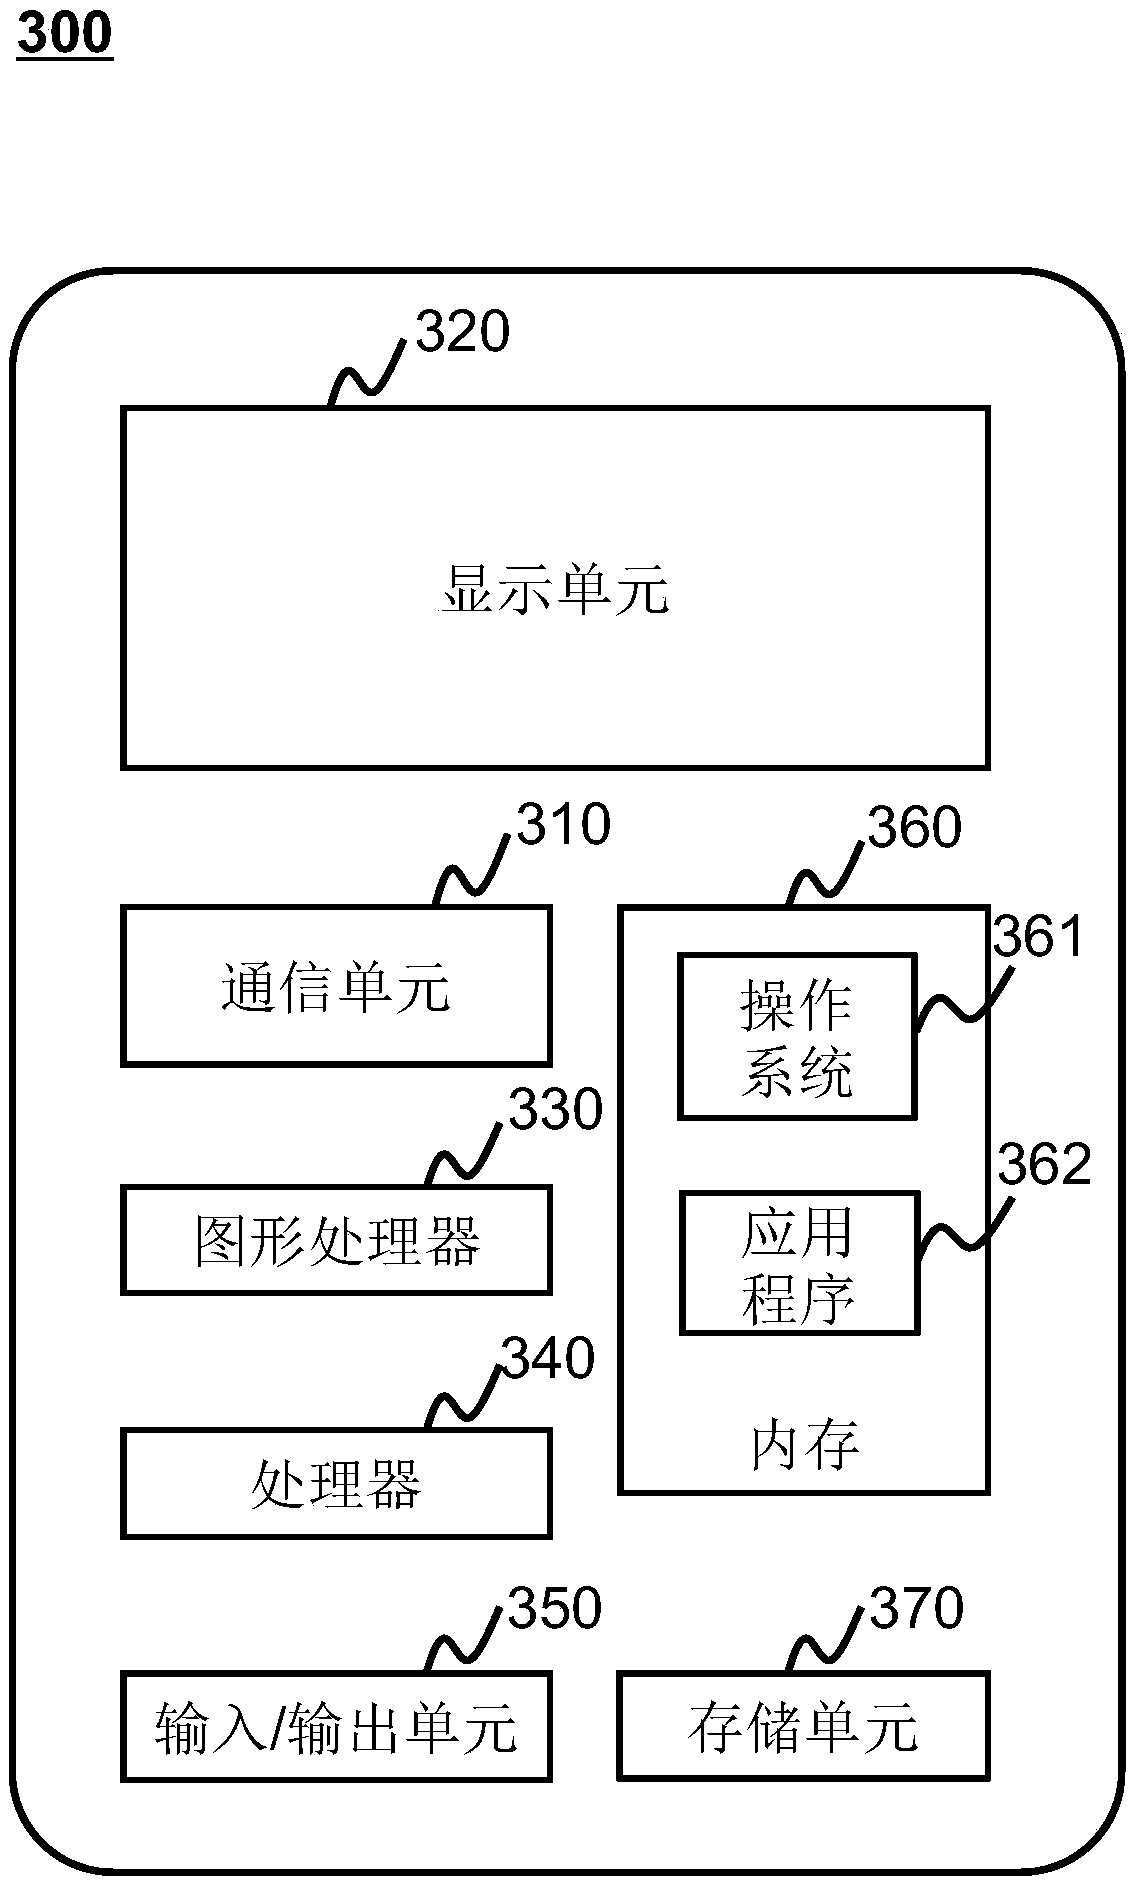 A medical image processing method, system and apparatus, and computer-readable storage medium